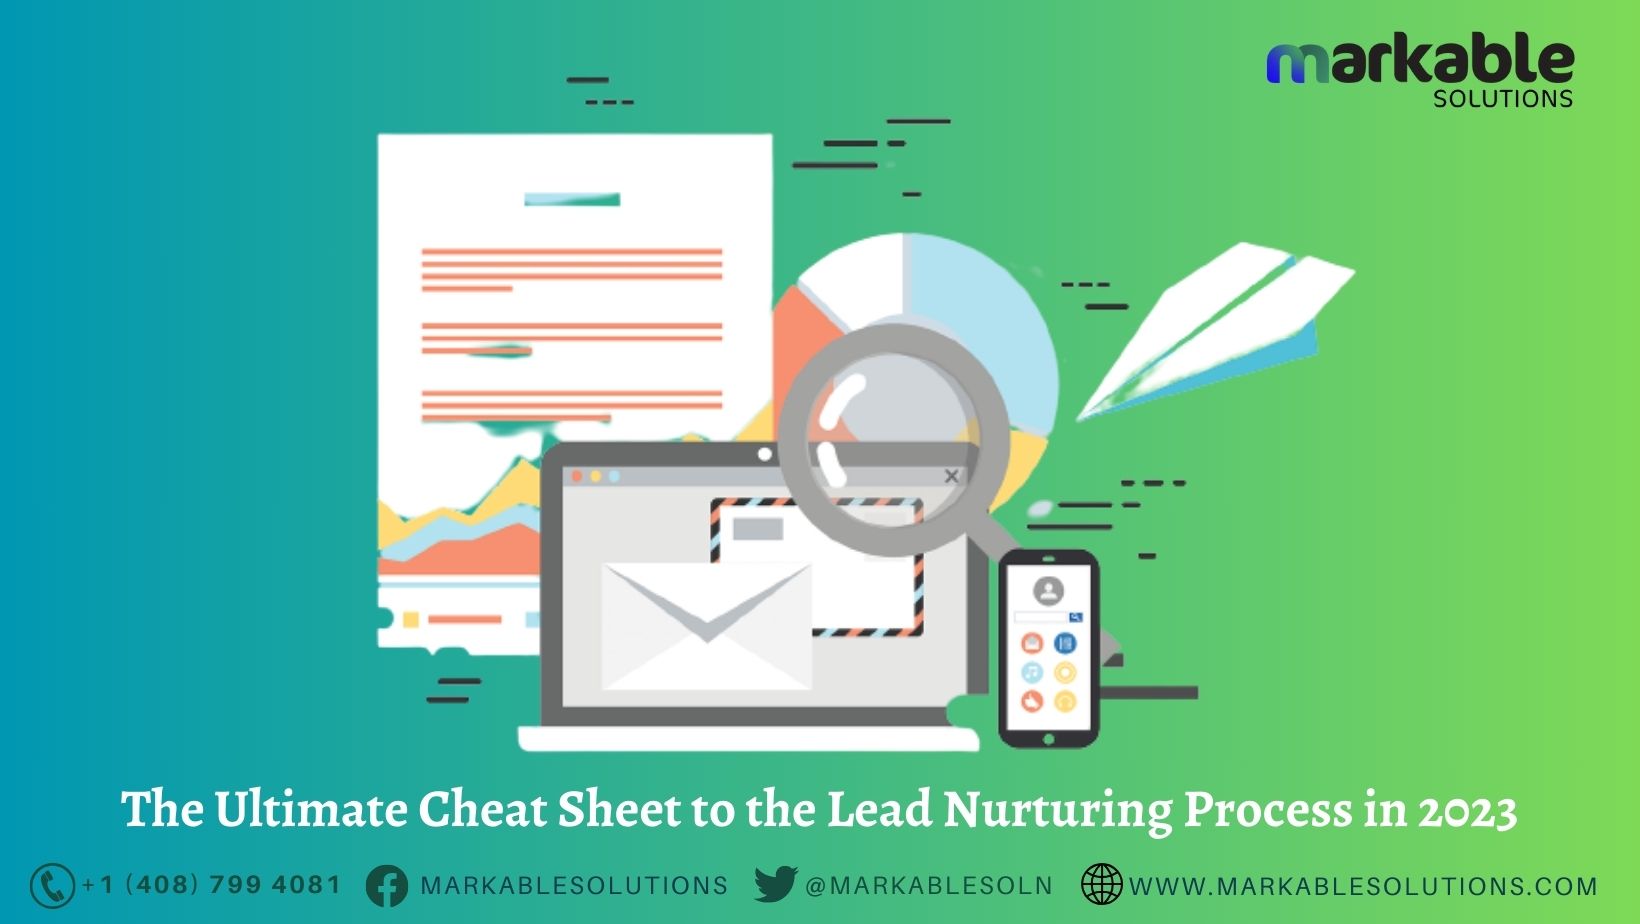 The Ultimate Cheat Sheet to the Lead Nurturing Process in 2023 - Markable Solutions